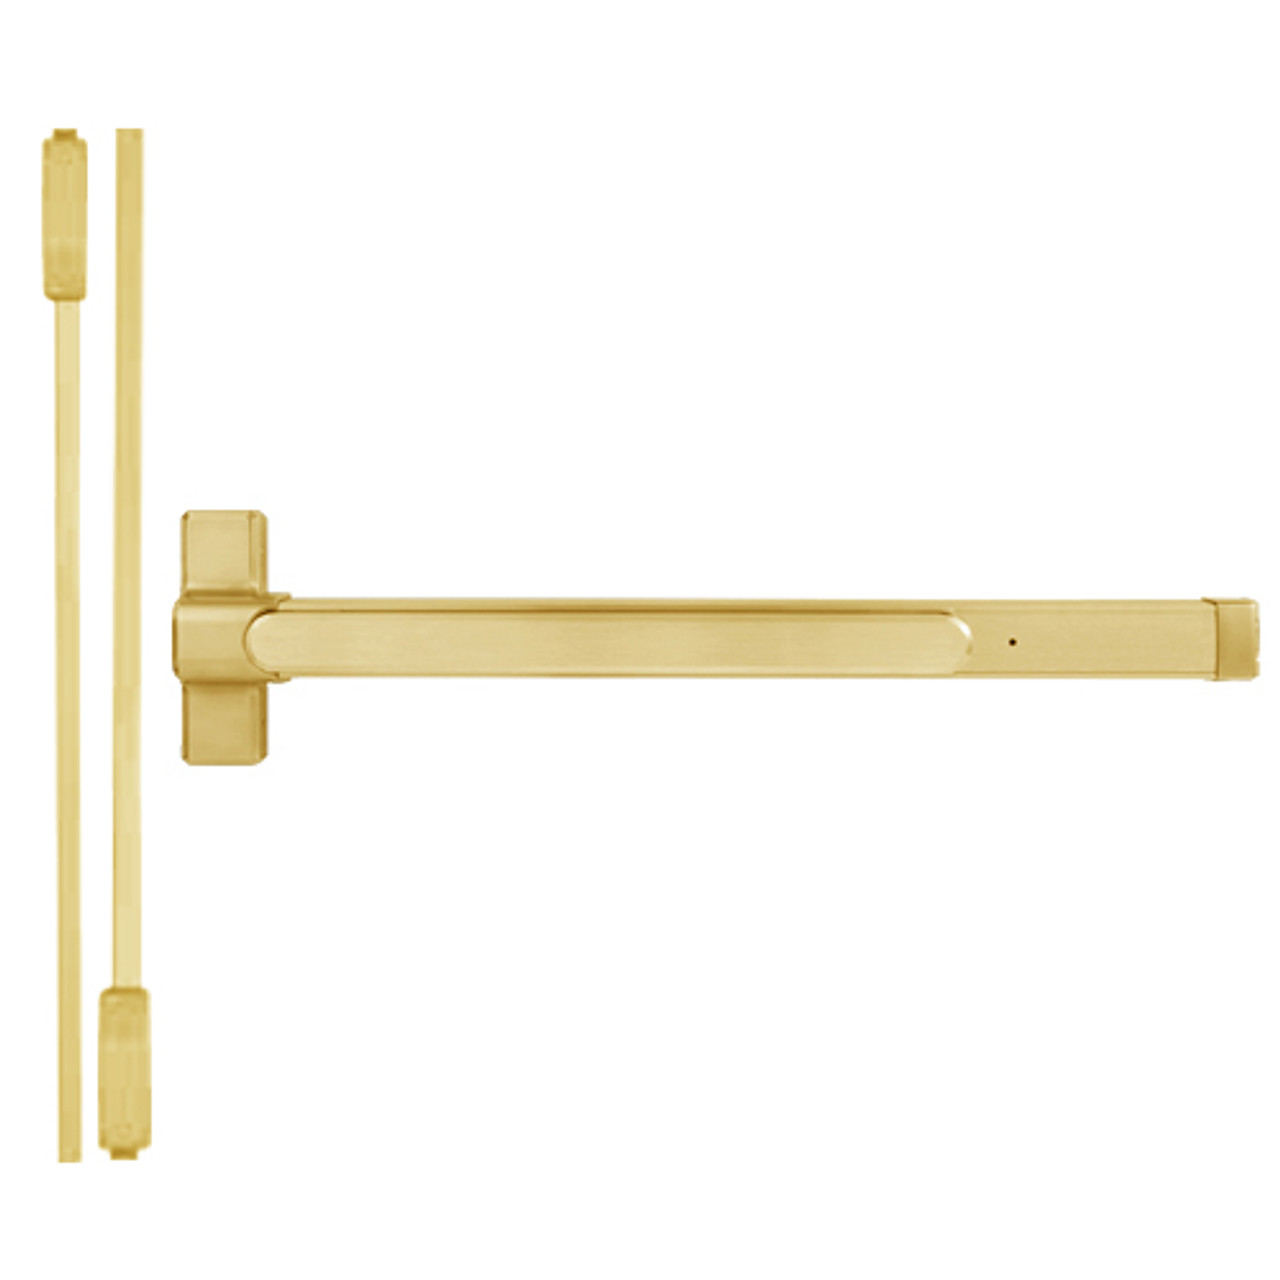 QED116X-36-7-605 Stanley QED100 Series Heavy Duty Surface Vertical Rod Fire Rated Exit Device in Bright Brass Finish